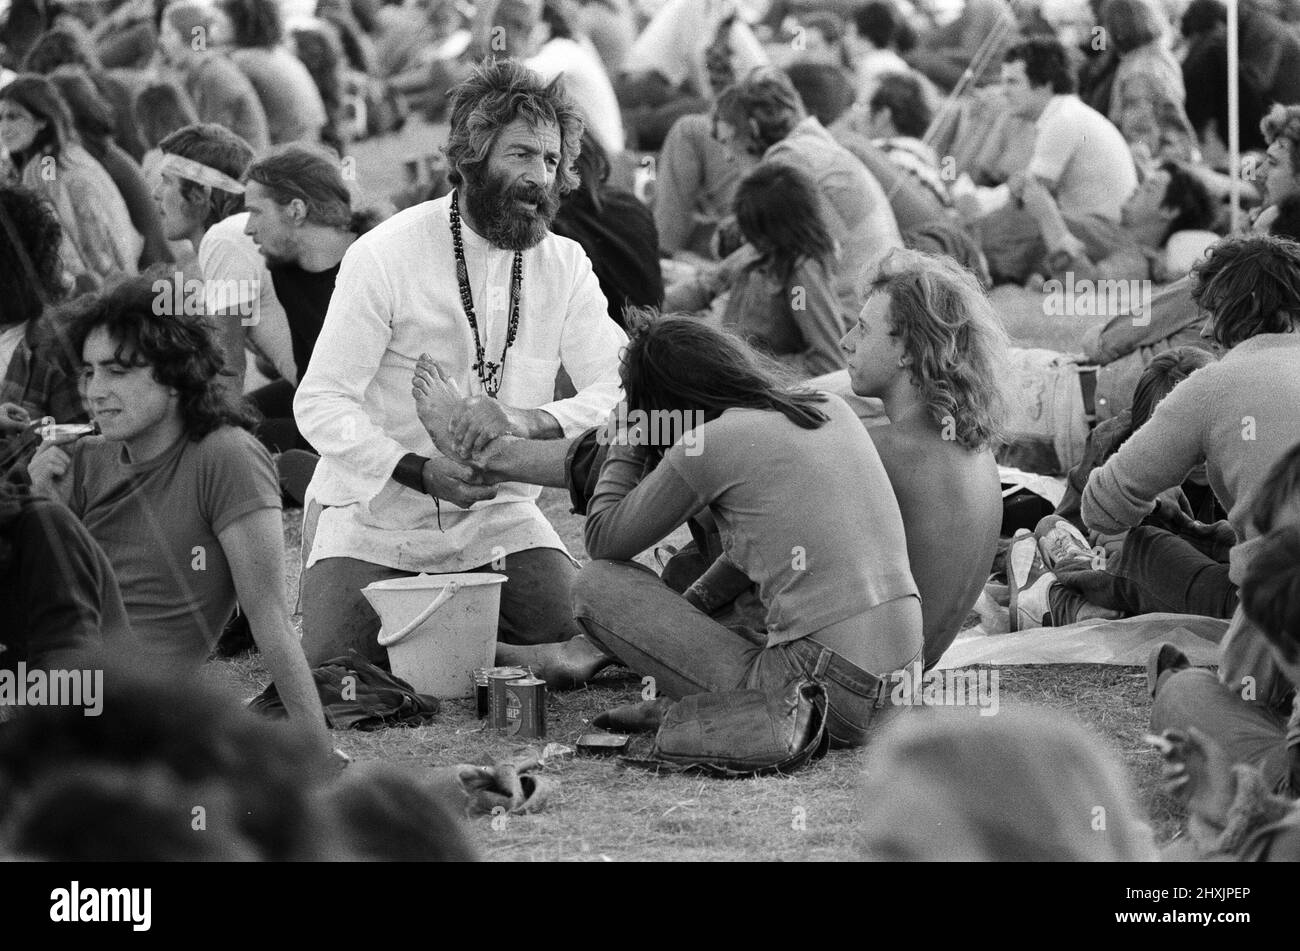 'Mick the Vic', who is the Rev Michael Scott, Vicar at St Mark's Church, Reading, tours the festival site at reading, washing the feet of pop fans. 27th August 1976. Stock Photo